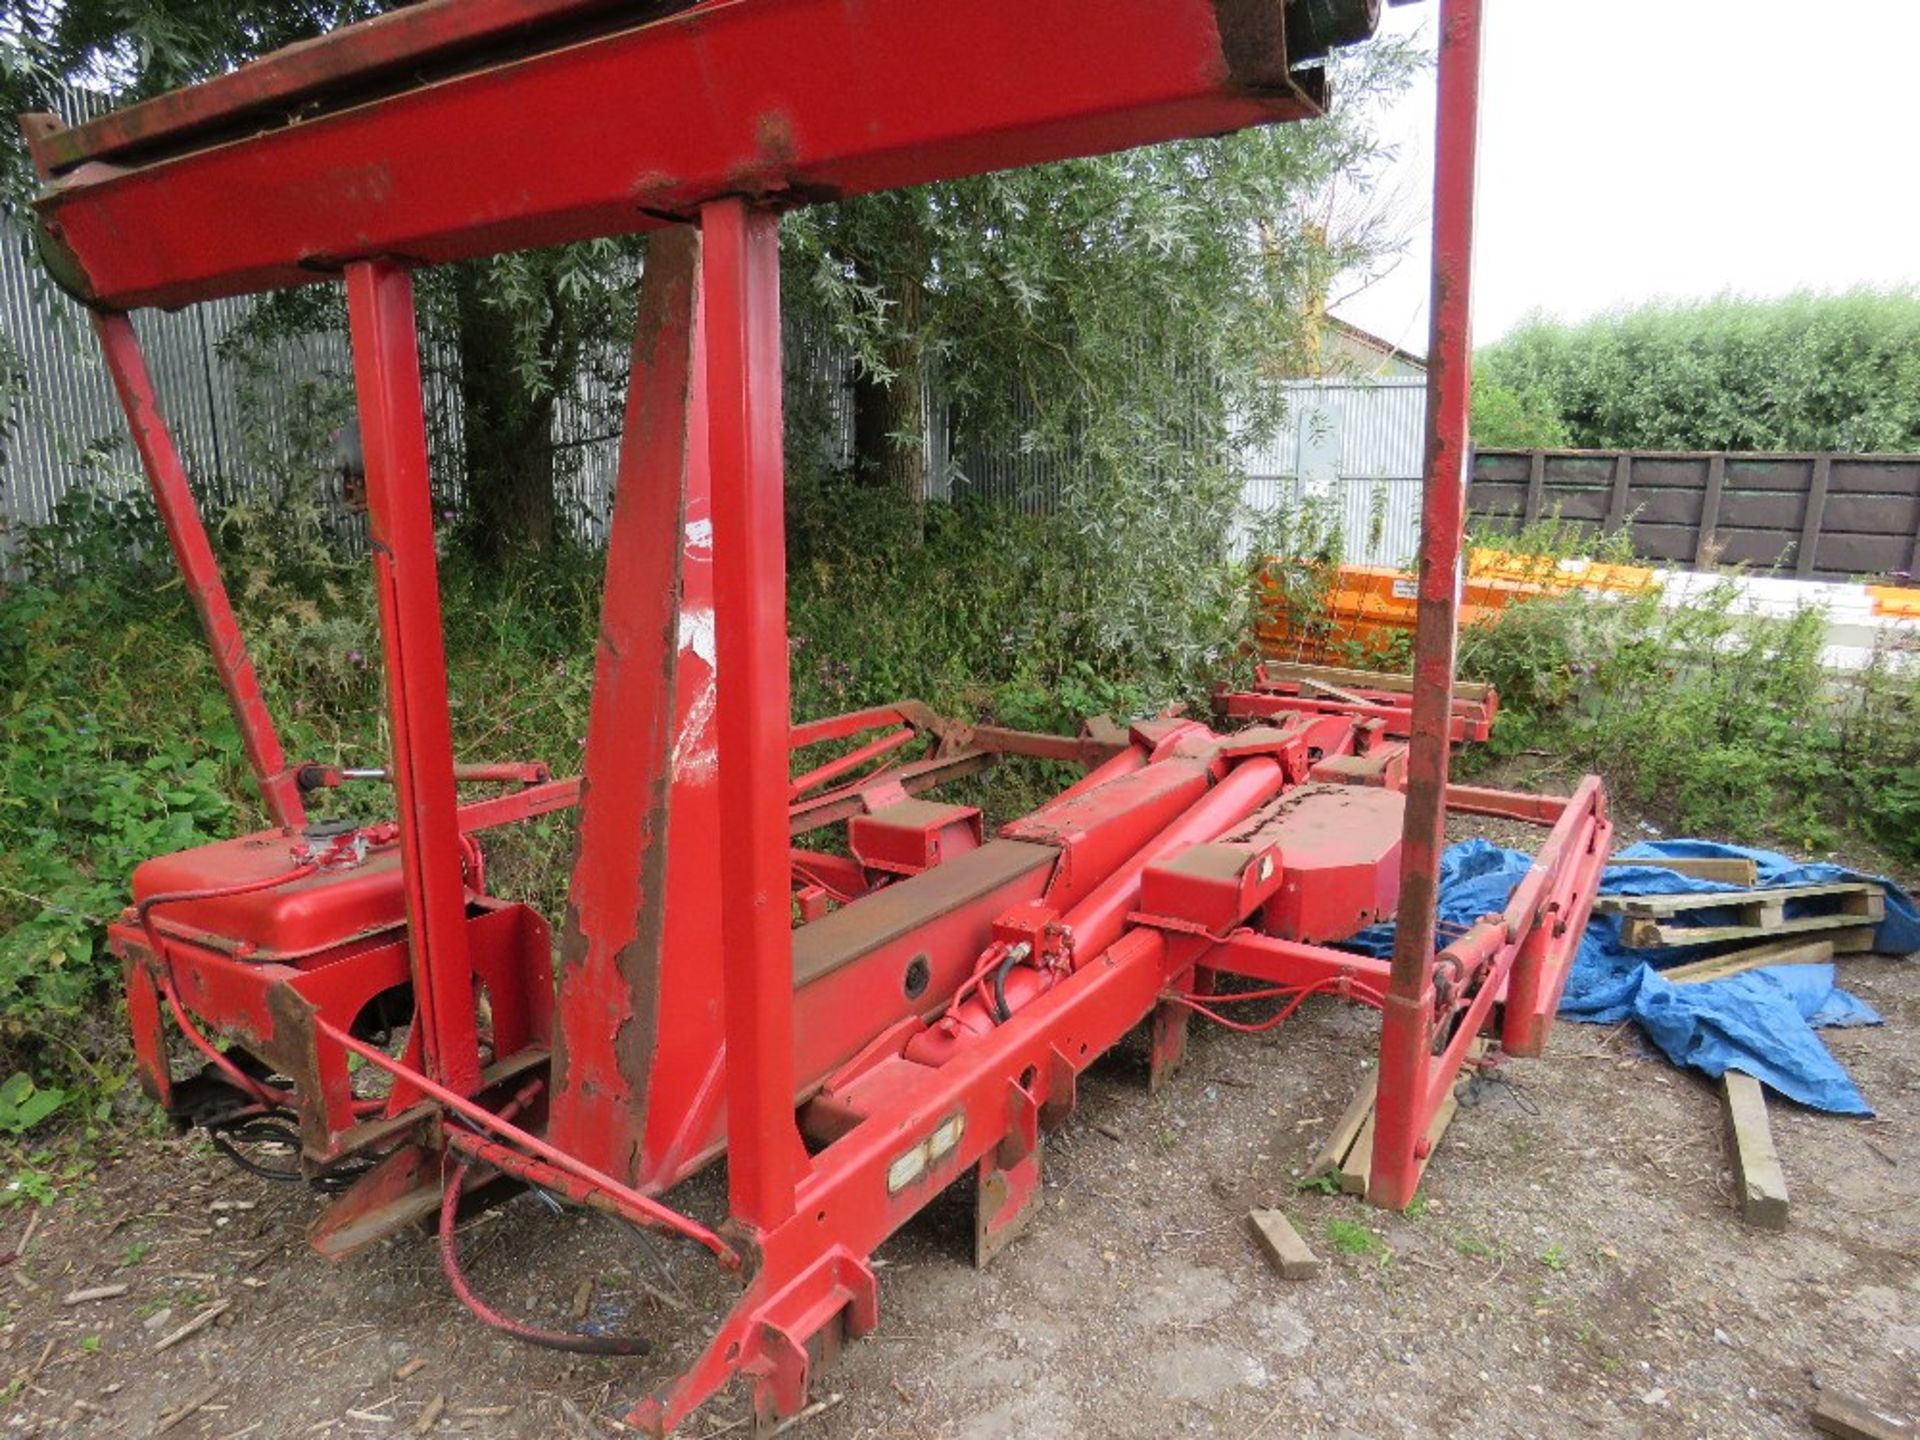 Edbro 8-wheel lorry hook lift equipment, removed from export vehicle - Image 2 of 5